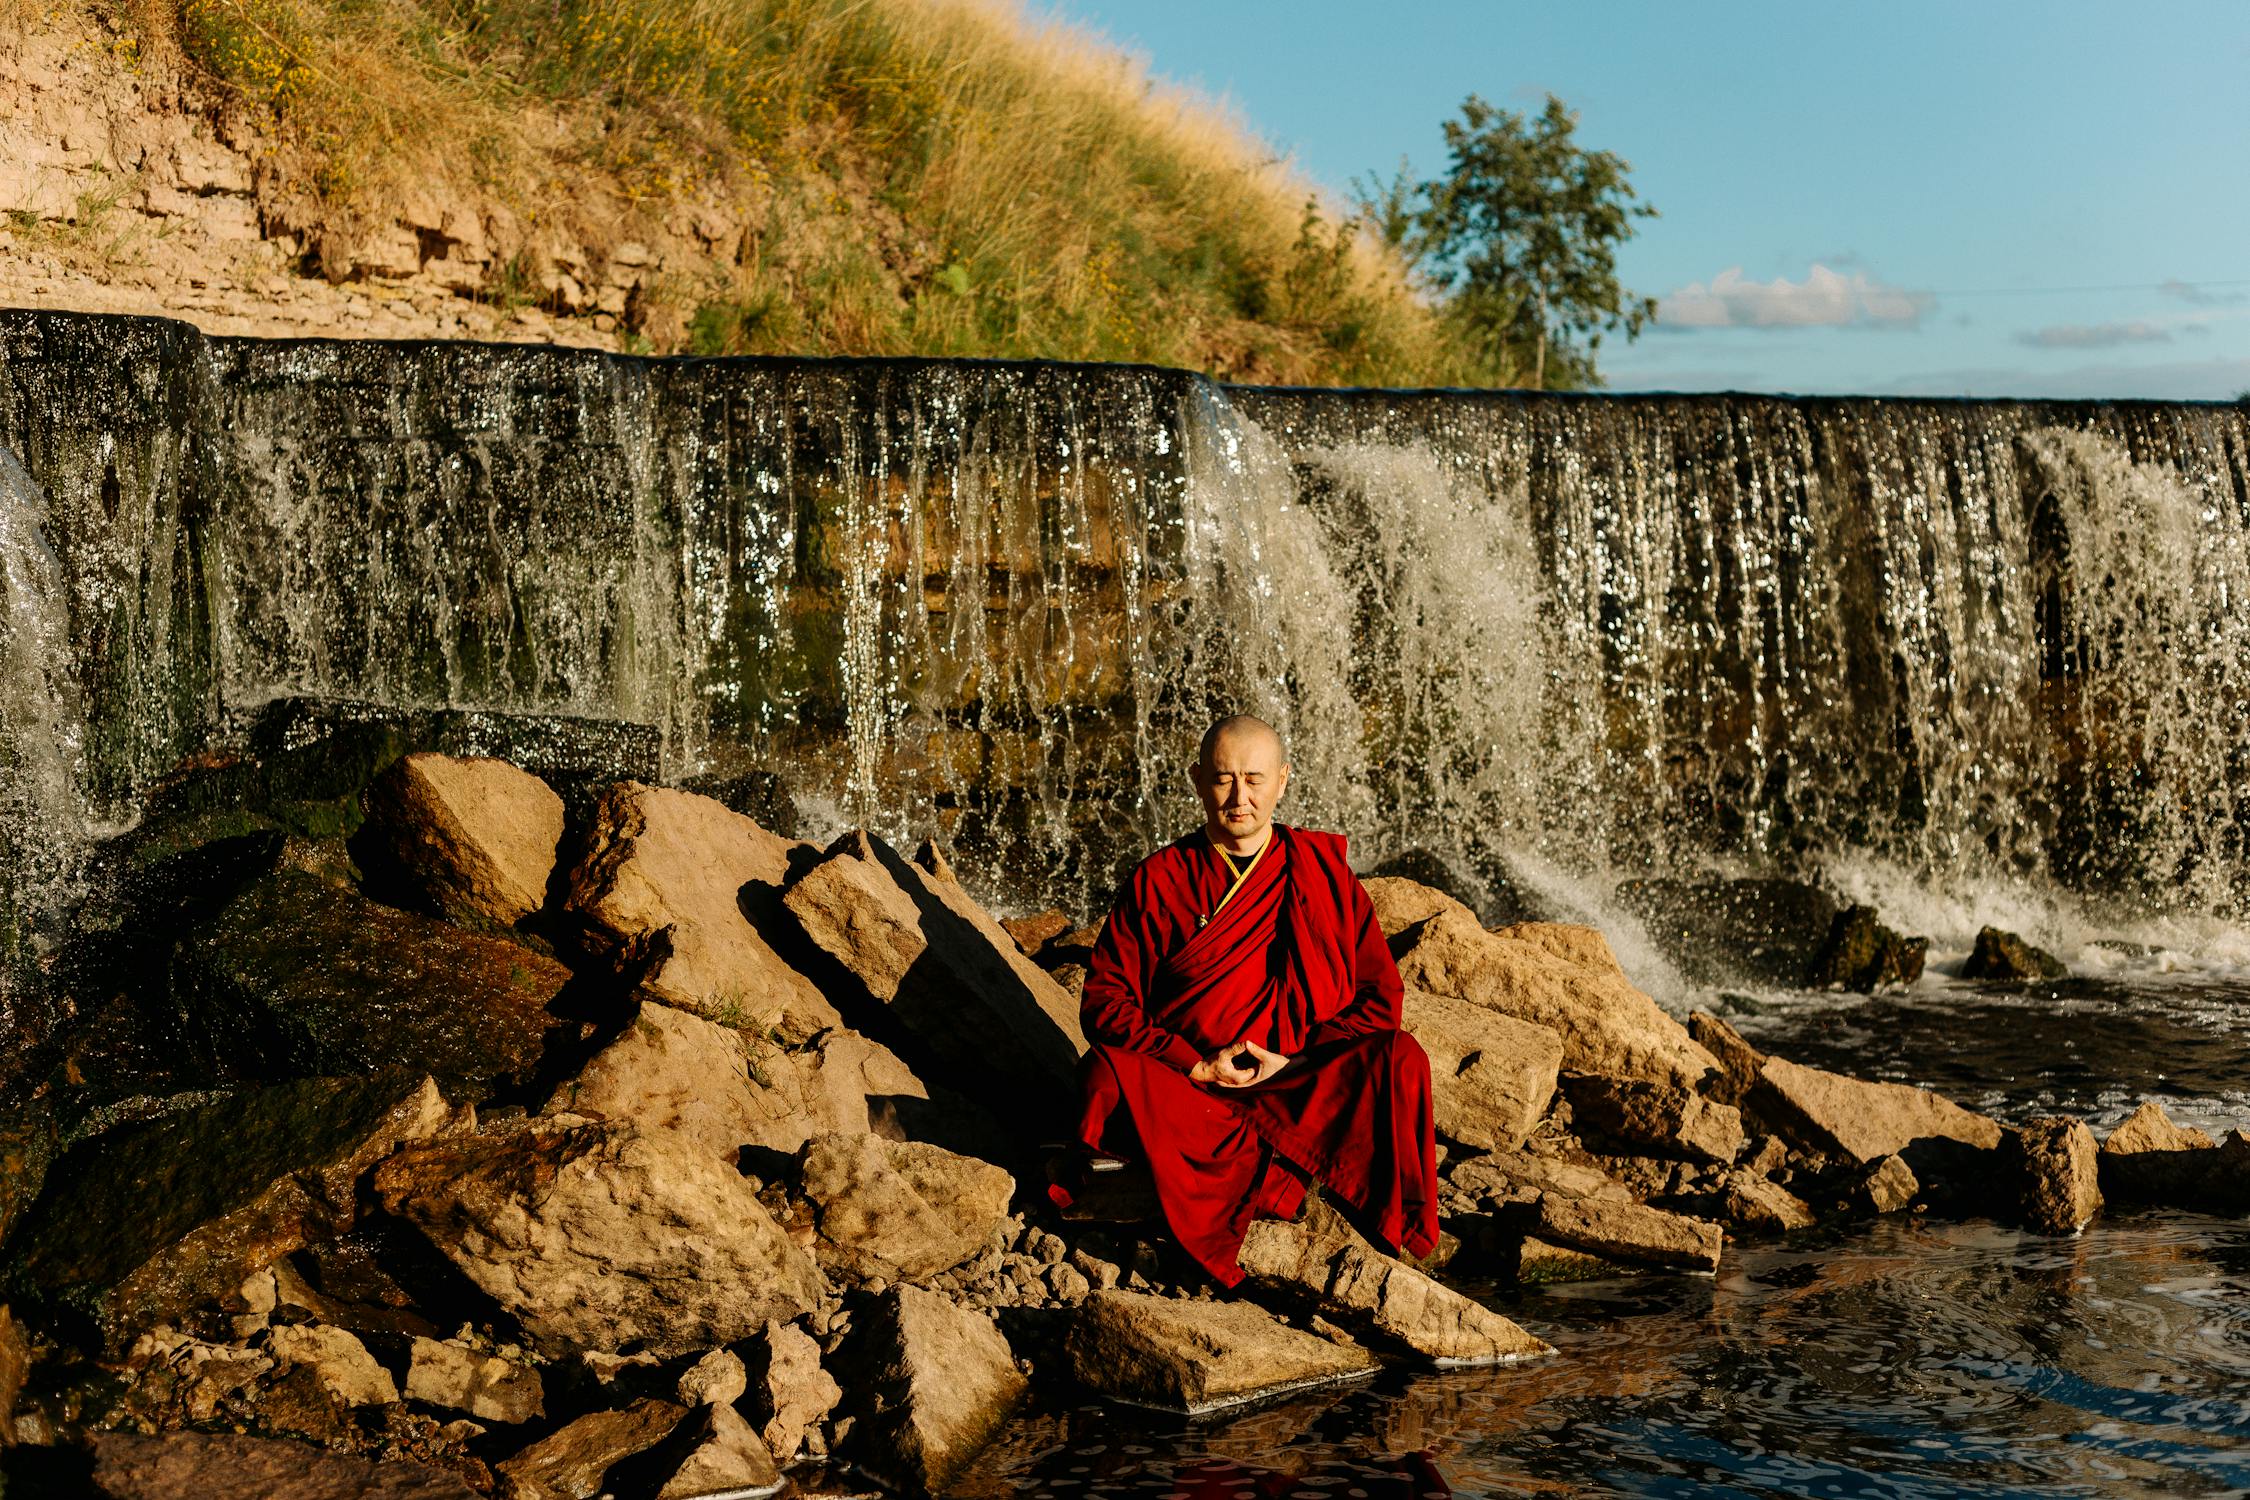 Karma Photo by cottonbro from Pexels: https://www.pexels.com/photo/woman-in-red-robe-sitting-on-rock-near-waterfalls-5415954/